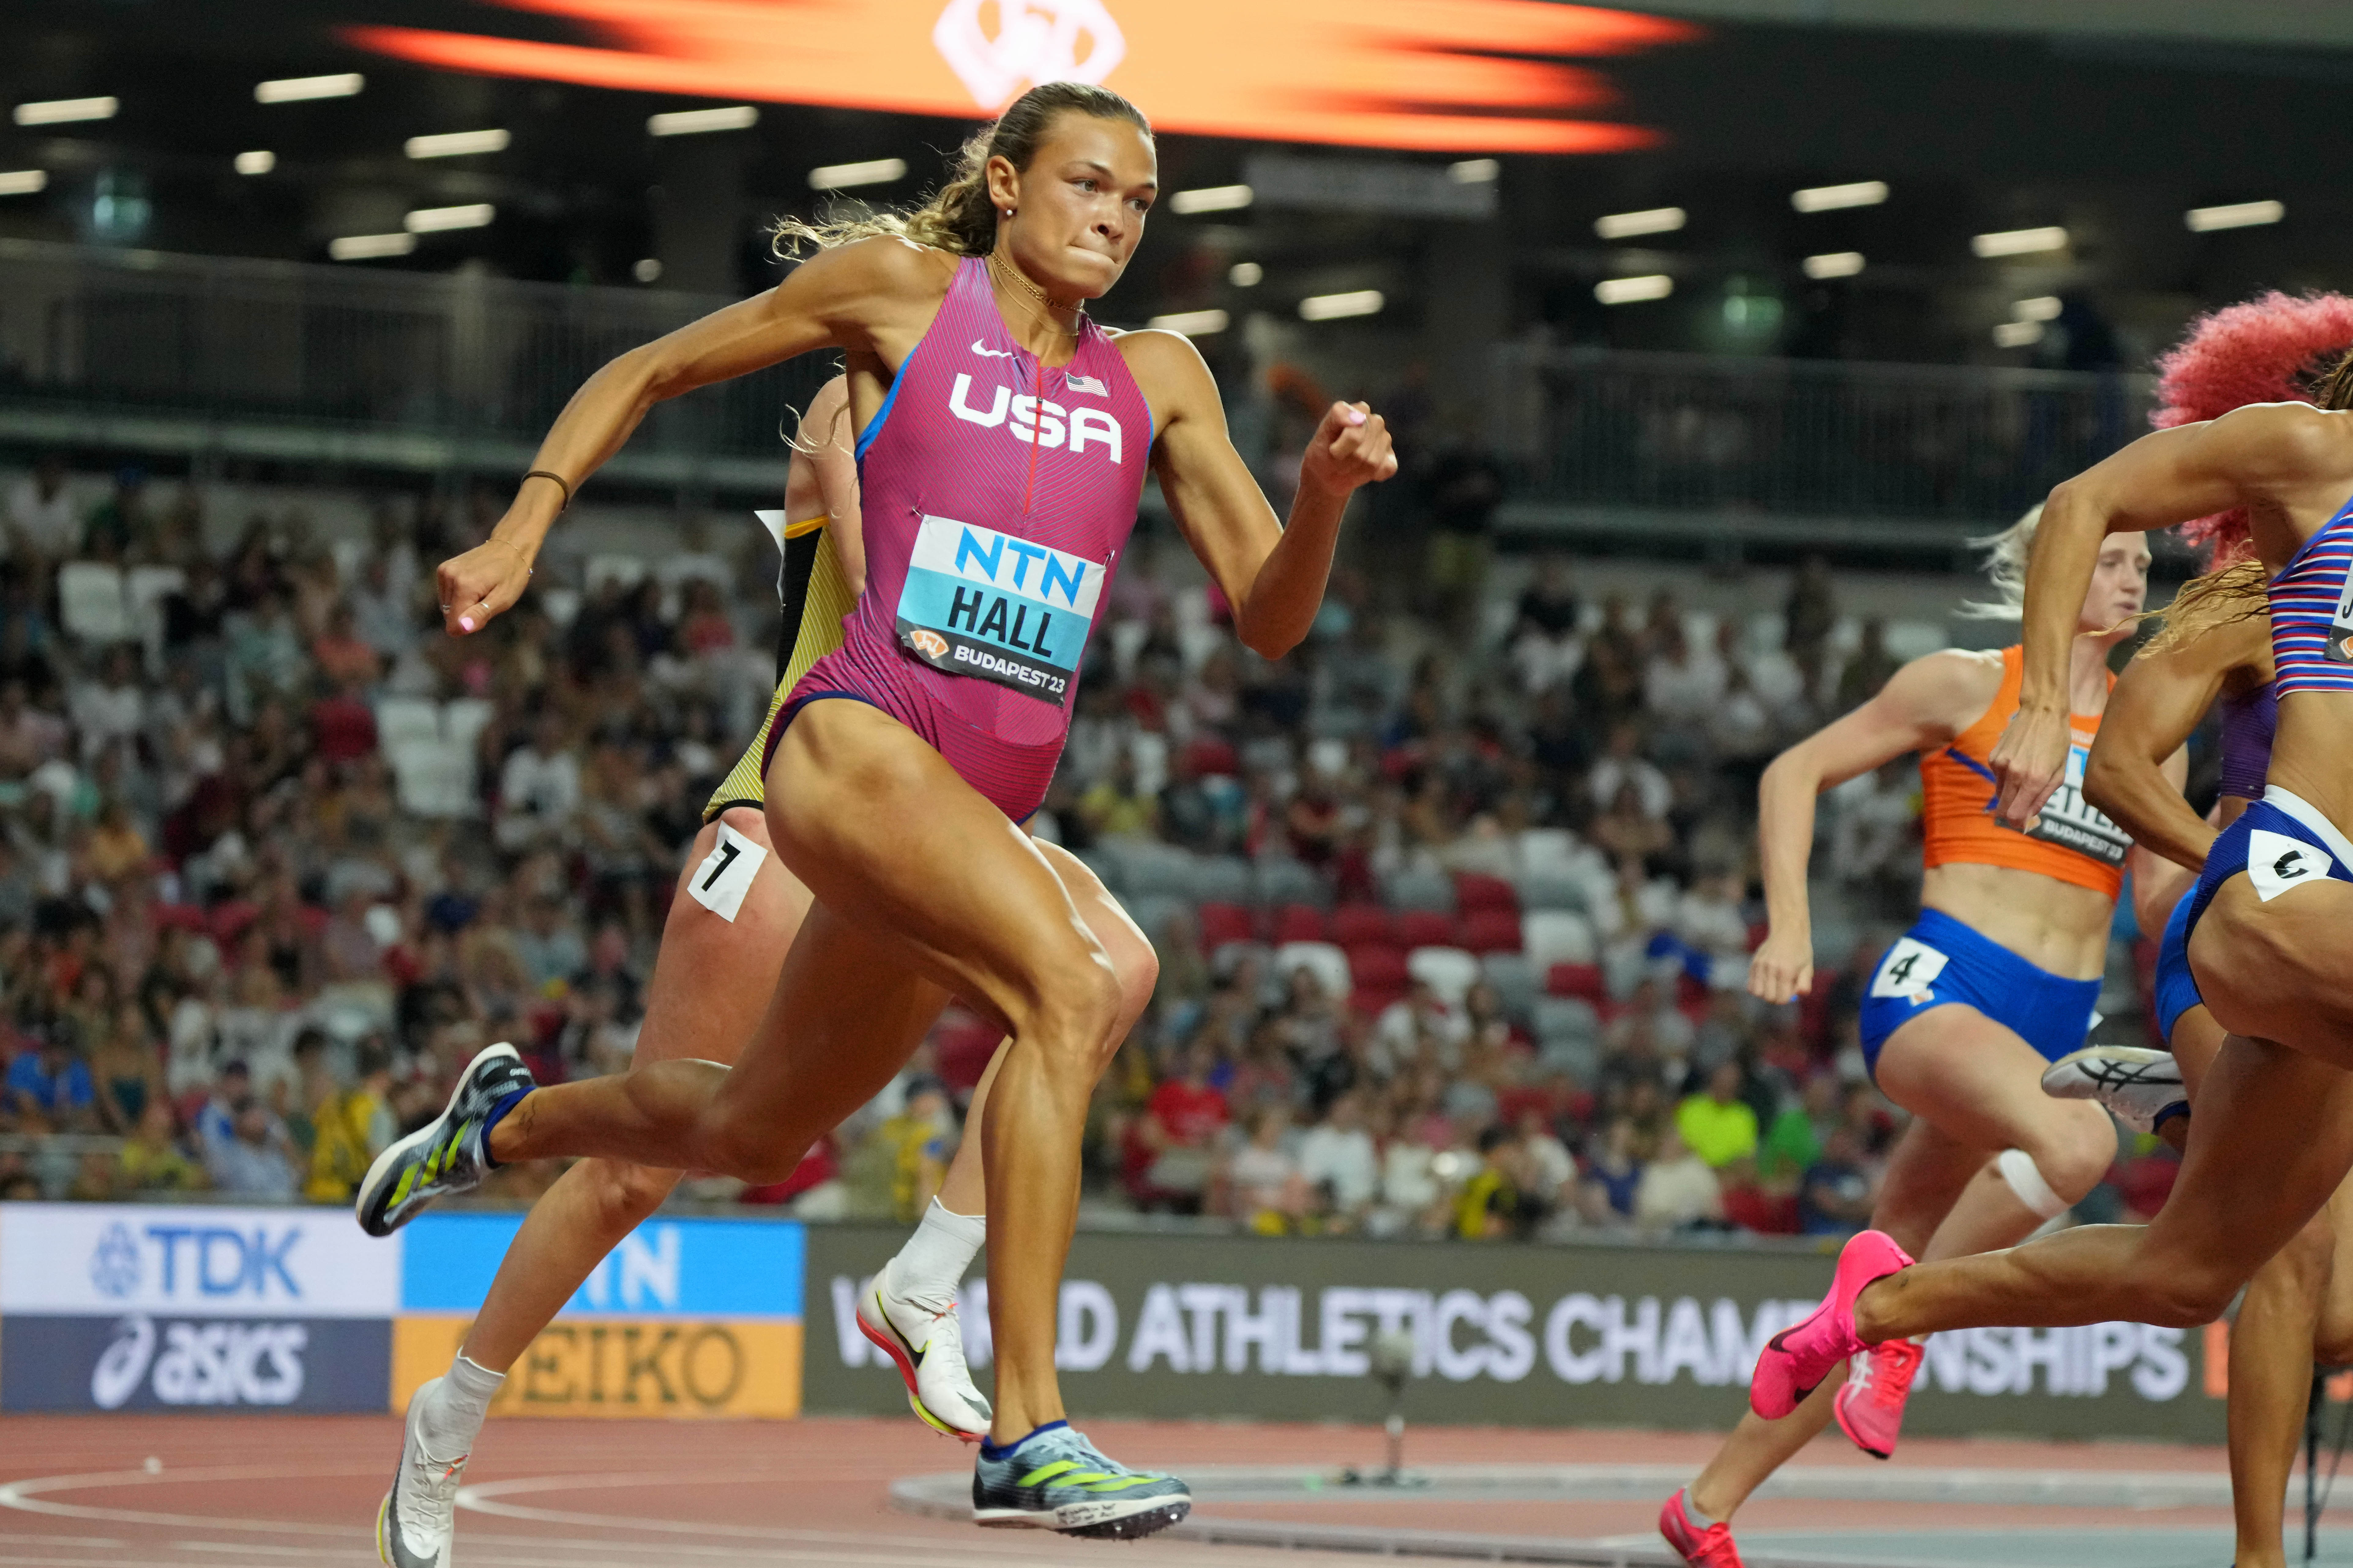 Women's heptathlon: United States' Anna Hall in 3rd place after